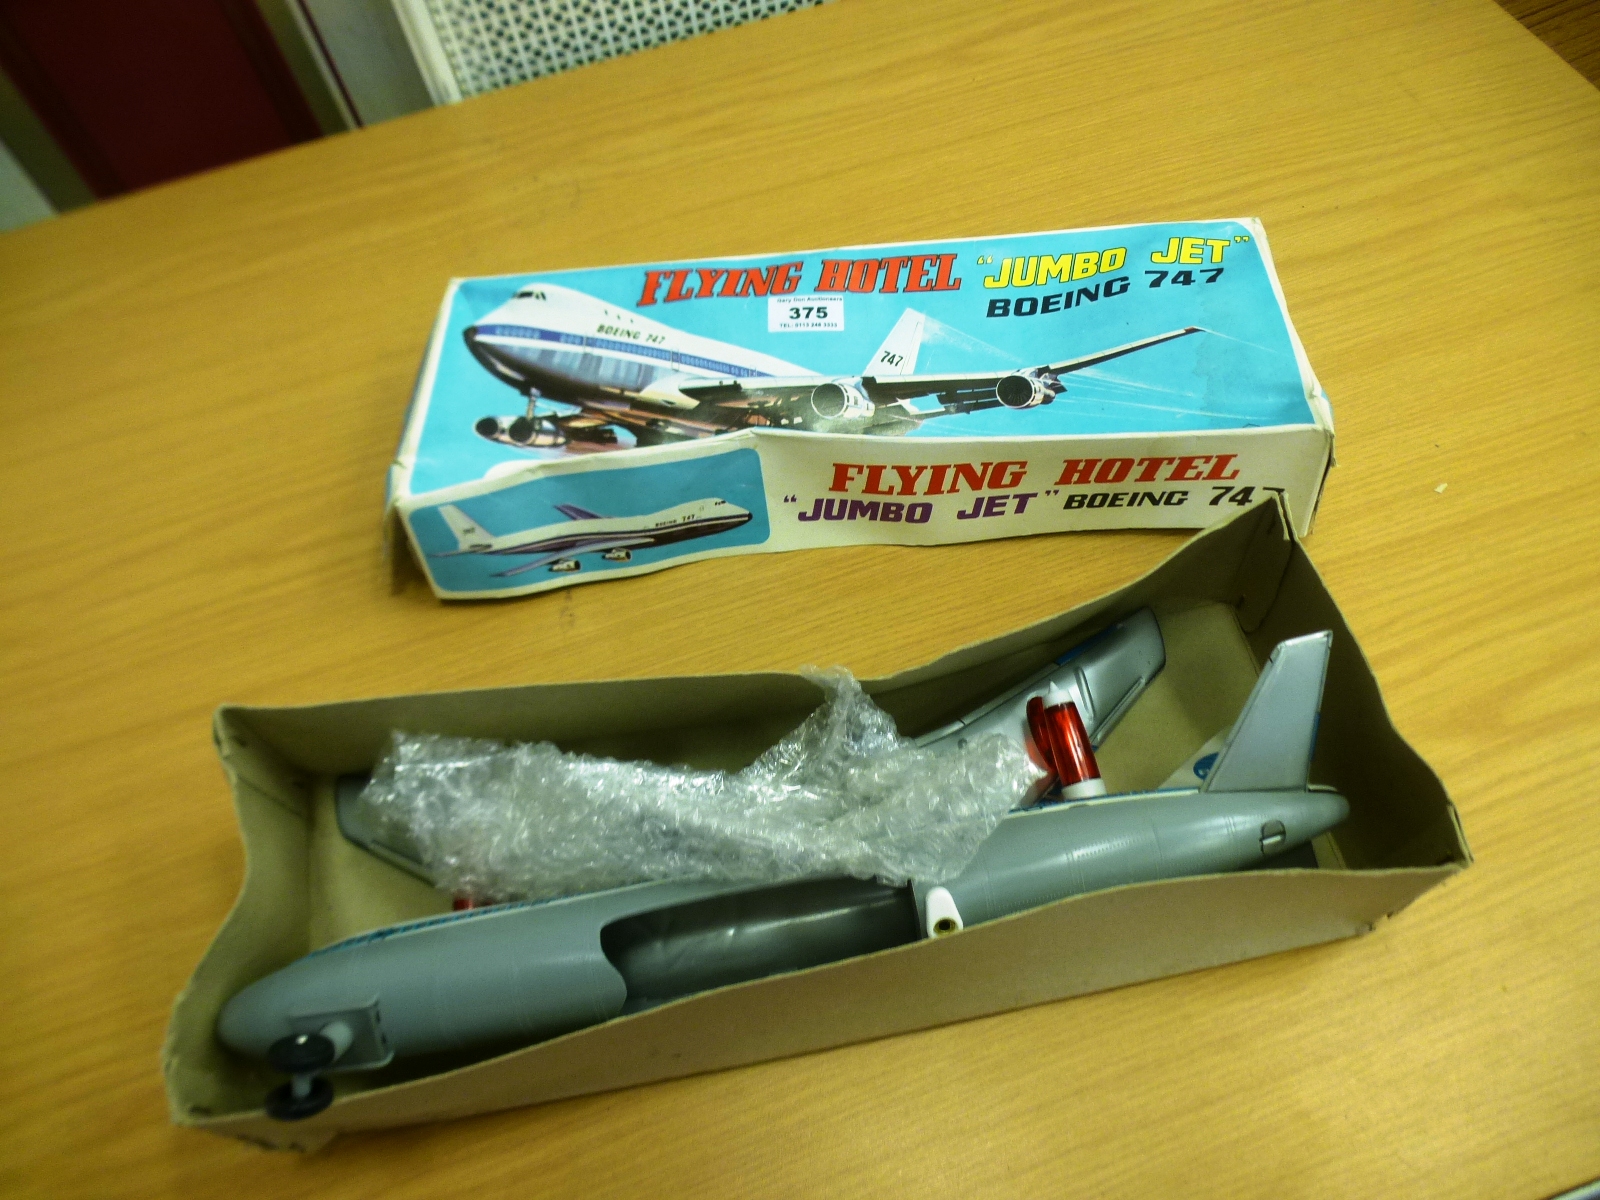 BOXED FLYING HOTEL PAN AM JUMBO JET BOEING 747 BY T.T. JAPAN - Image 2 of 3